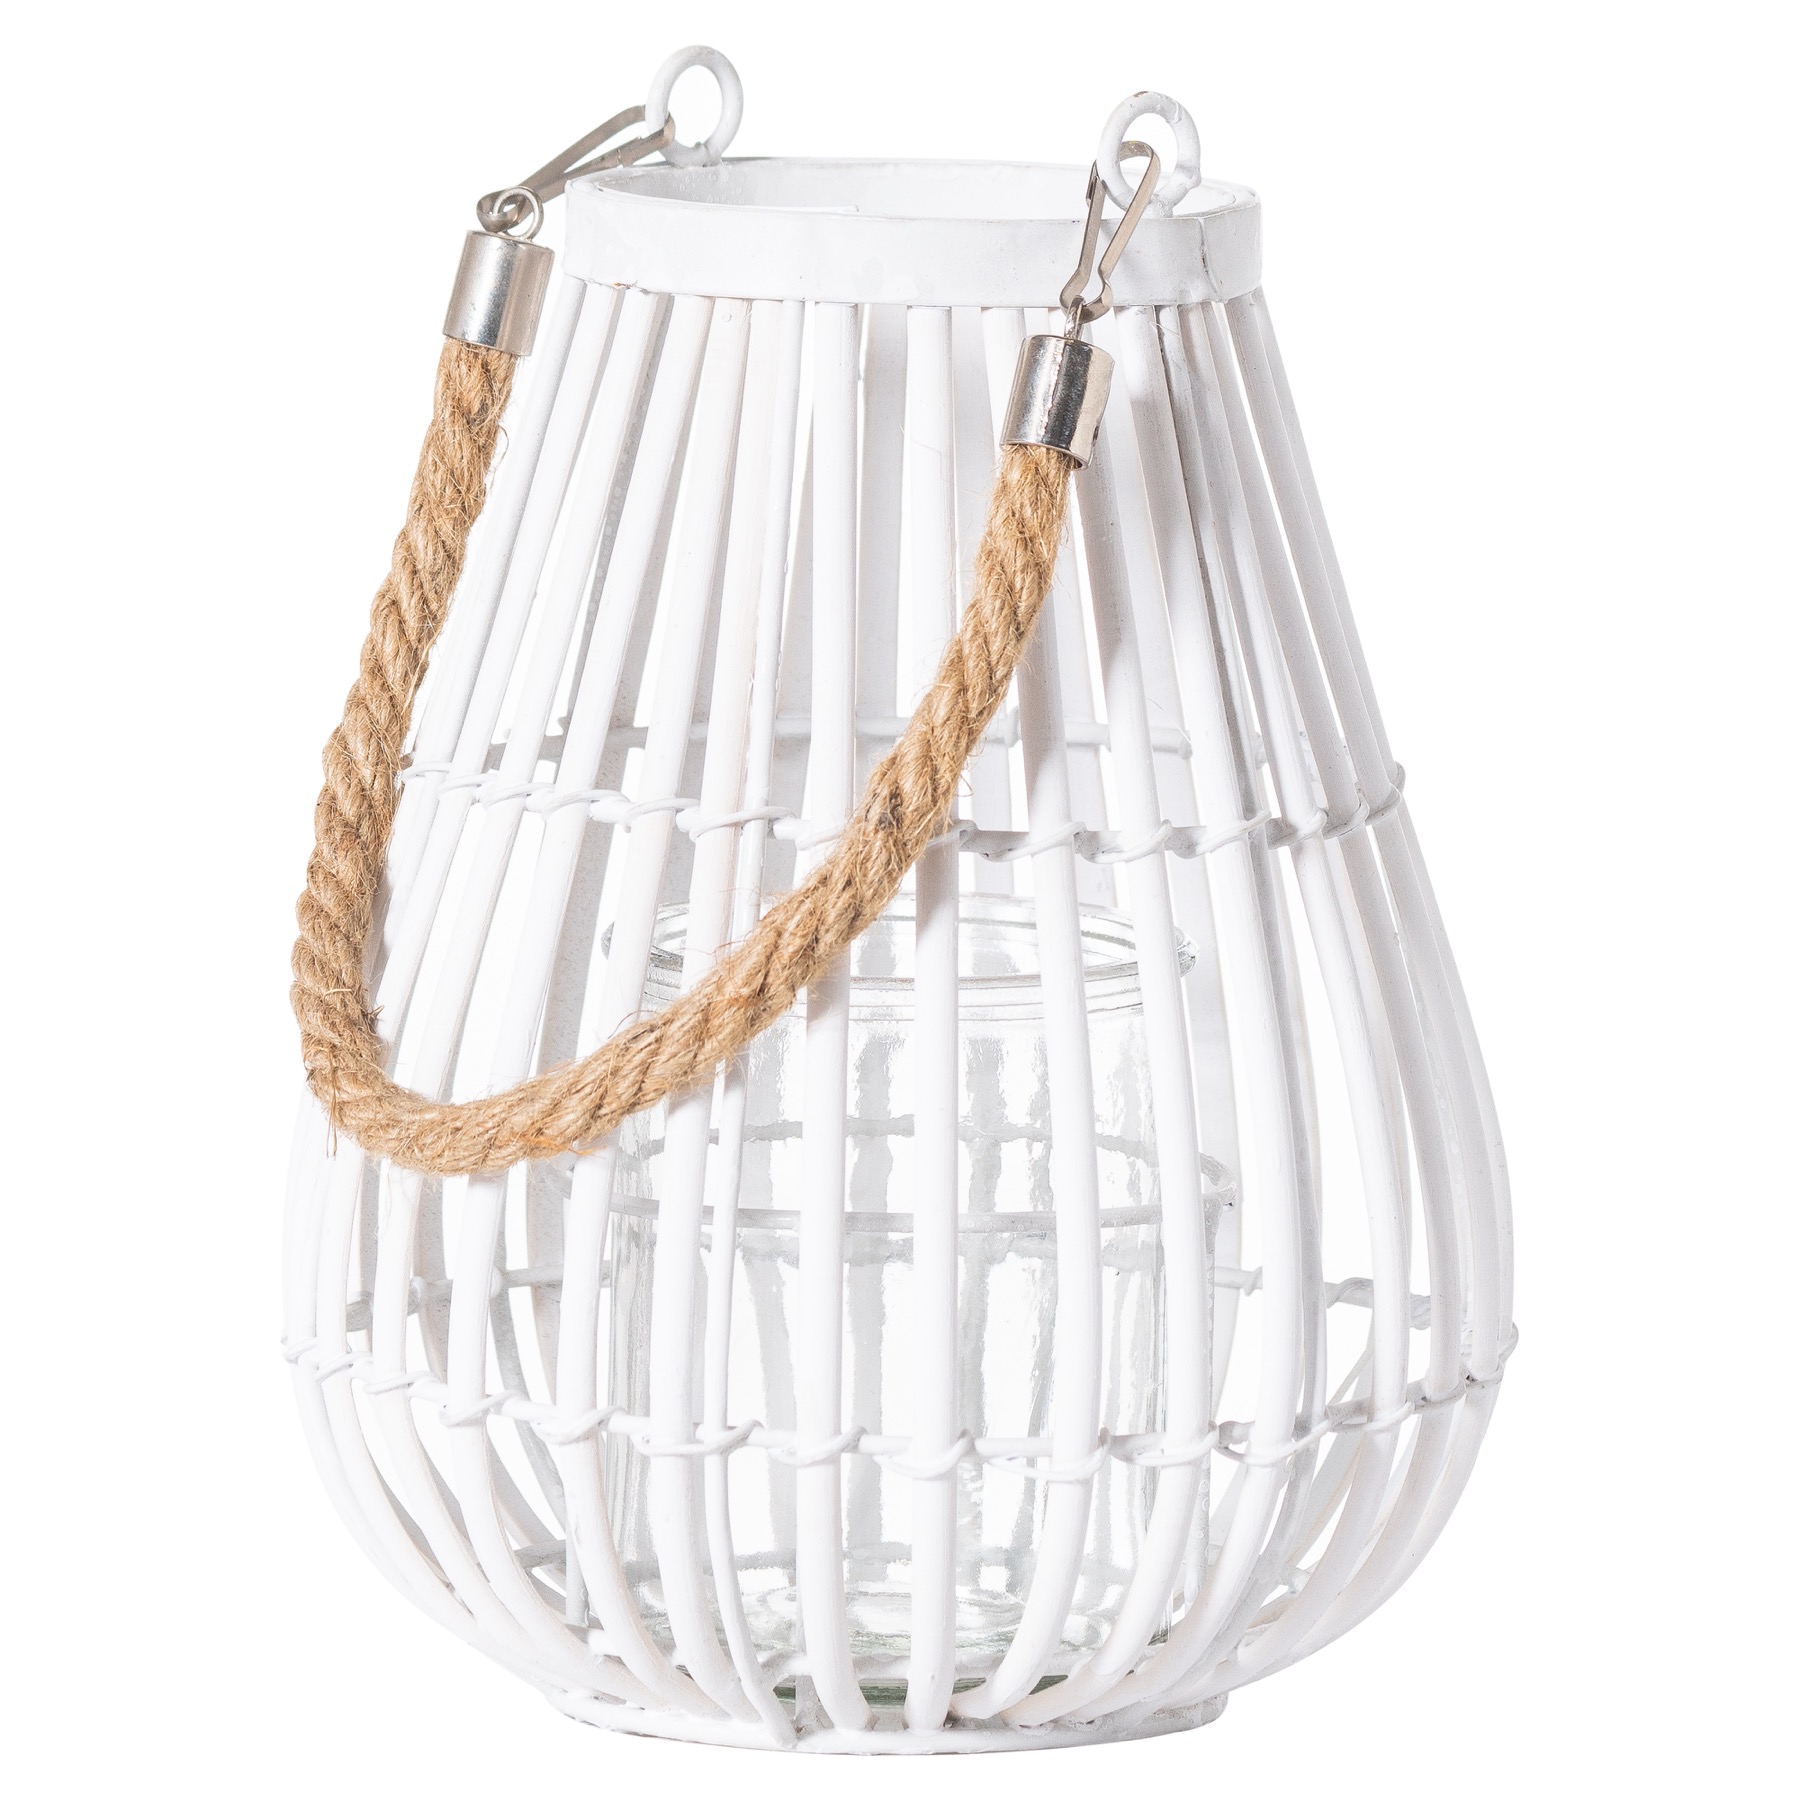 Small Domed White Rattan Lantern With Rope Detail - Image 1